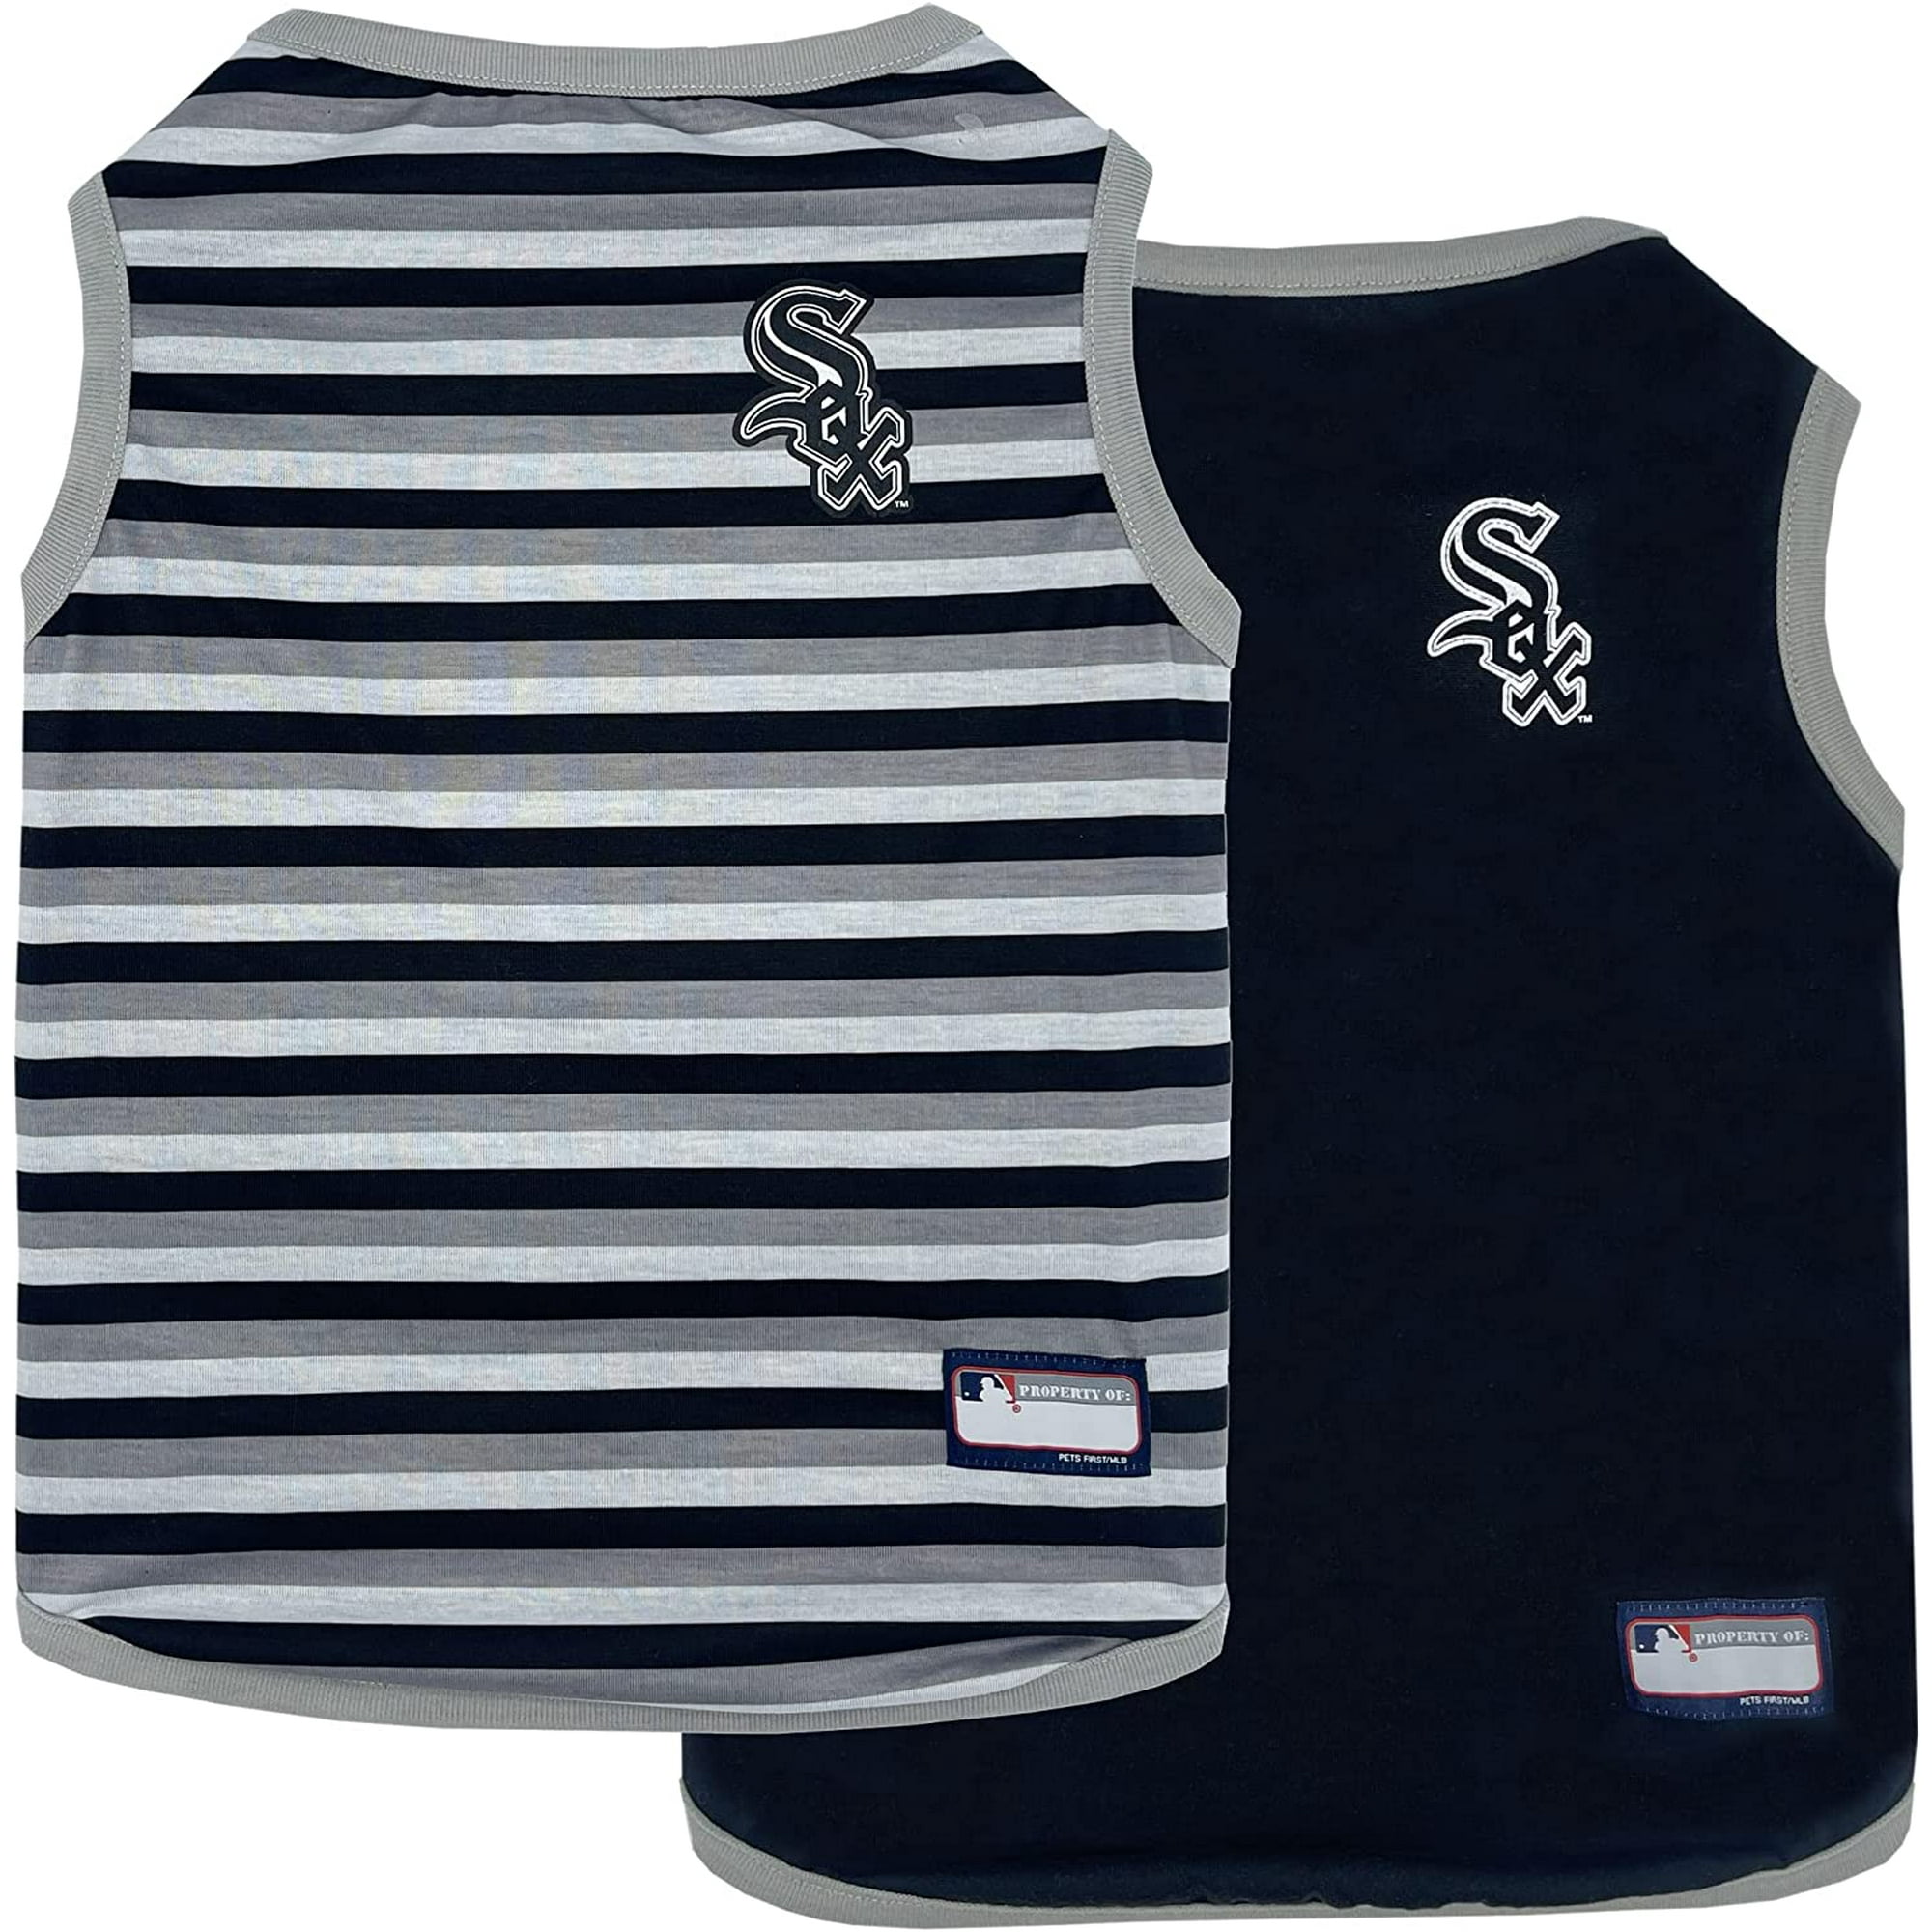 Pets First MLB Chicago White SOX Reversible T-Shirt, Large for Dogs & Cats.  A Pet Shirt with The Team Logo That Comes 2